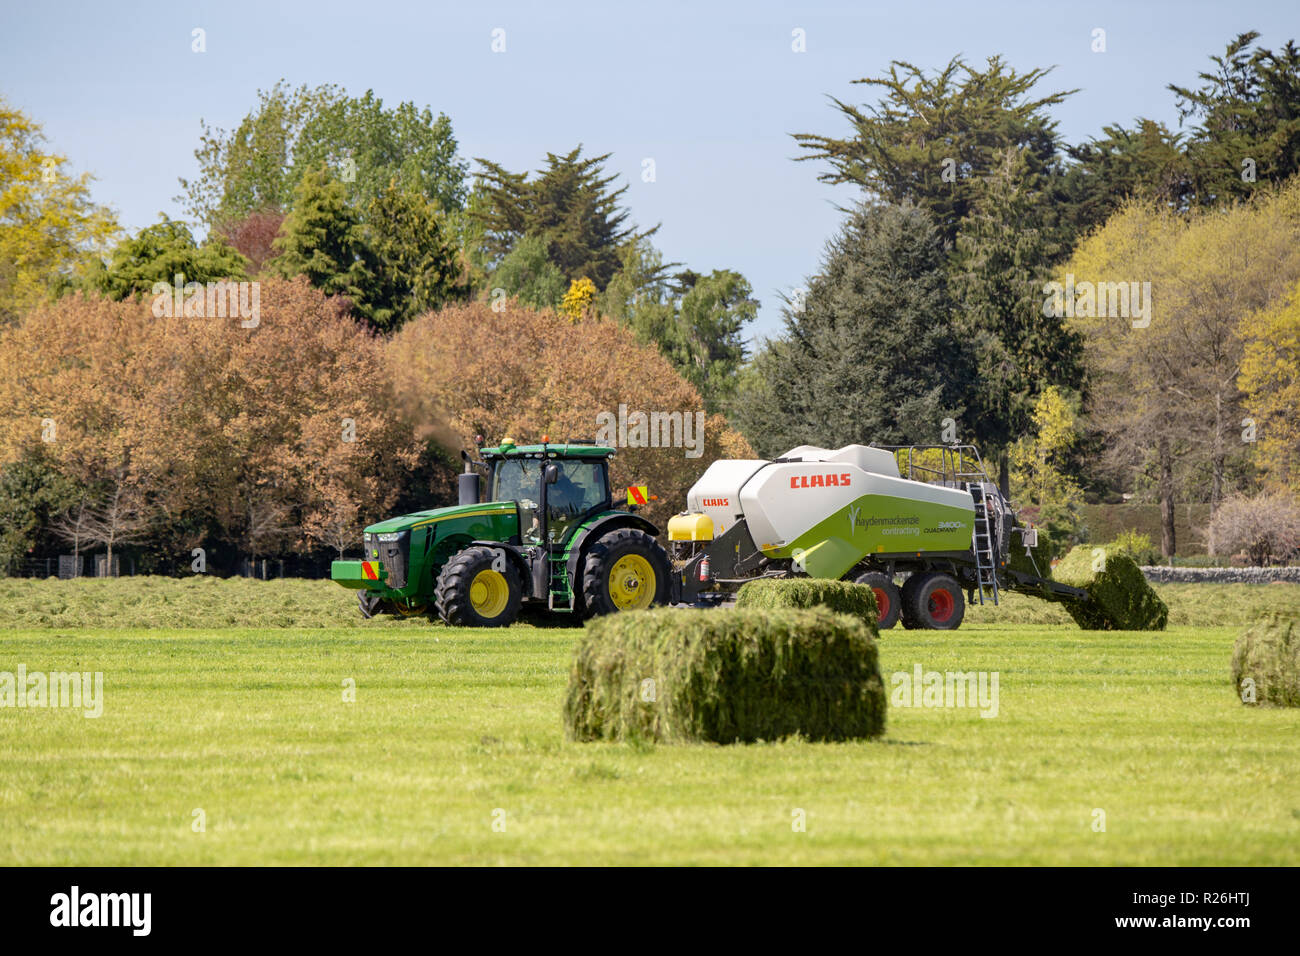 Geraldine, Canterbury, New Zealand - October 21 2018: A farming scene with a John Deere tractor and a Claas baler making hay bales in spring Stock Photo